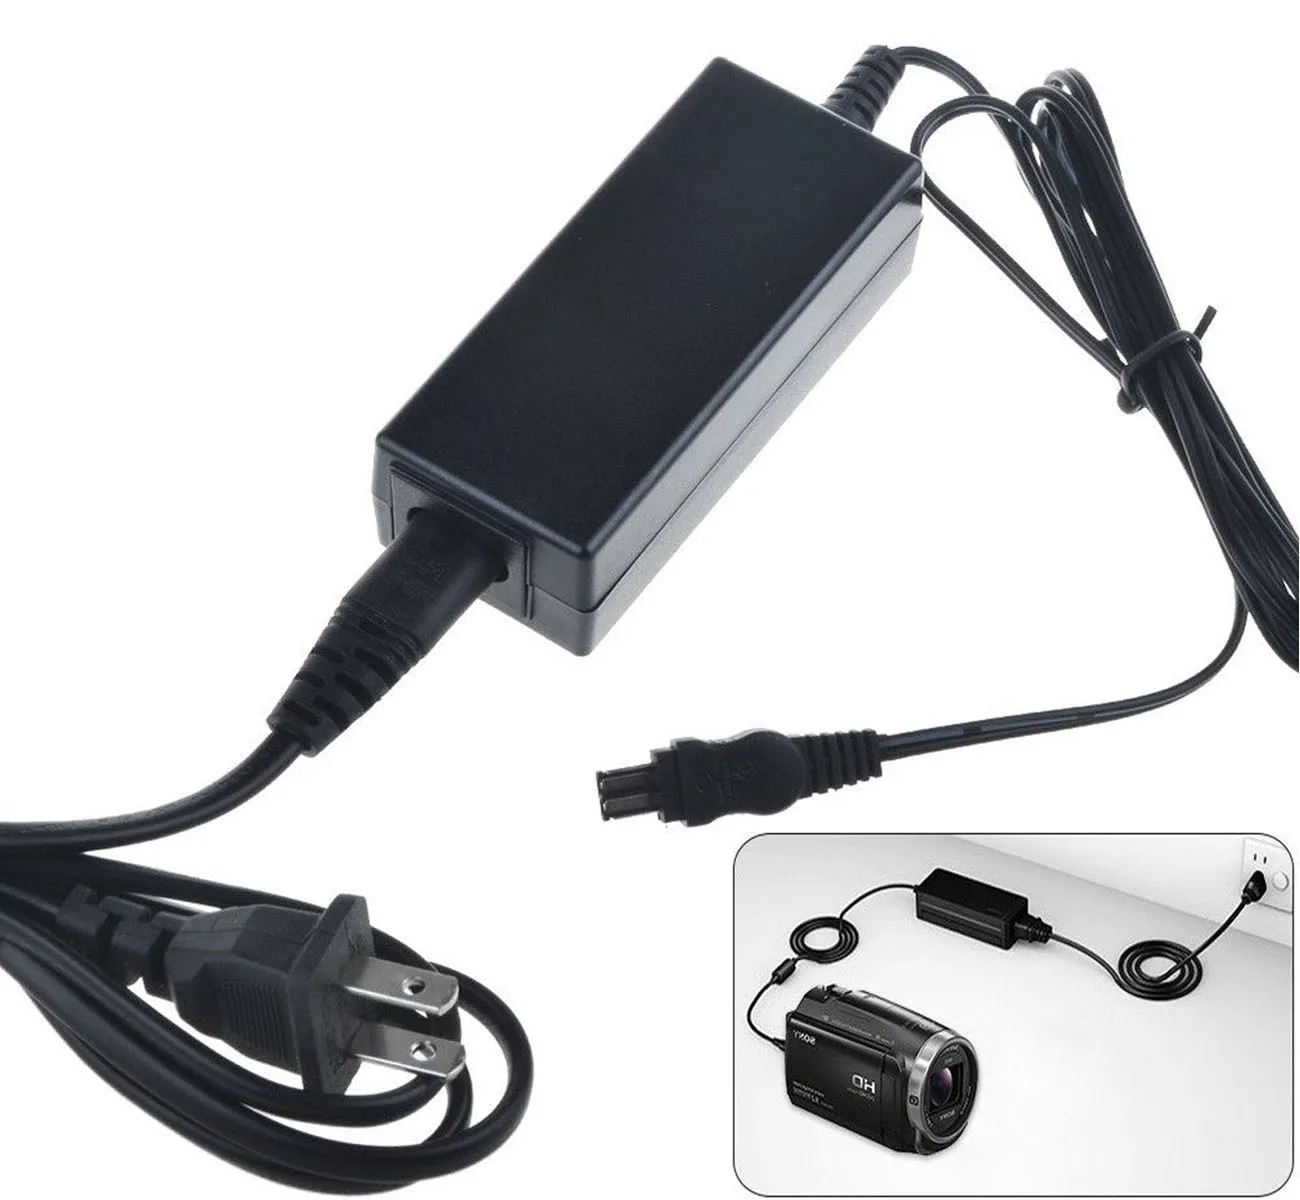 AC Power Adapter Charger for Sony HVR-A1 HVR-A1E HVR-HD1000 HVR-HD1000E HVR-HD1000P HVR-HD1000U HDV Camcorder | Электроника